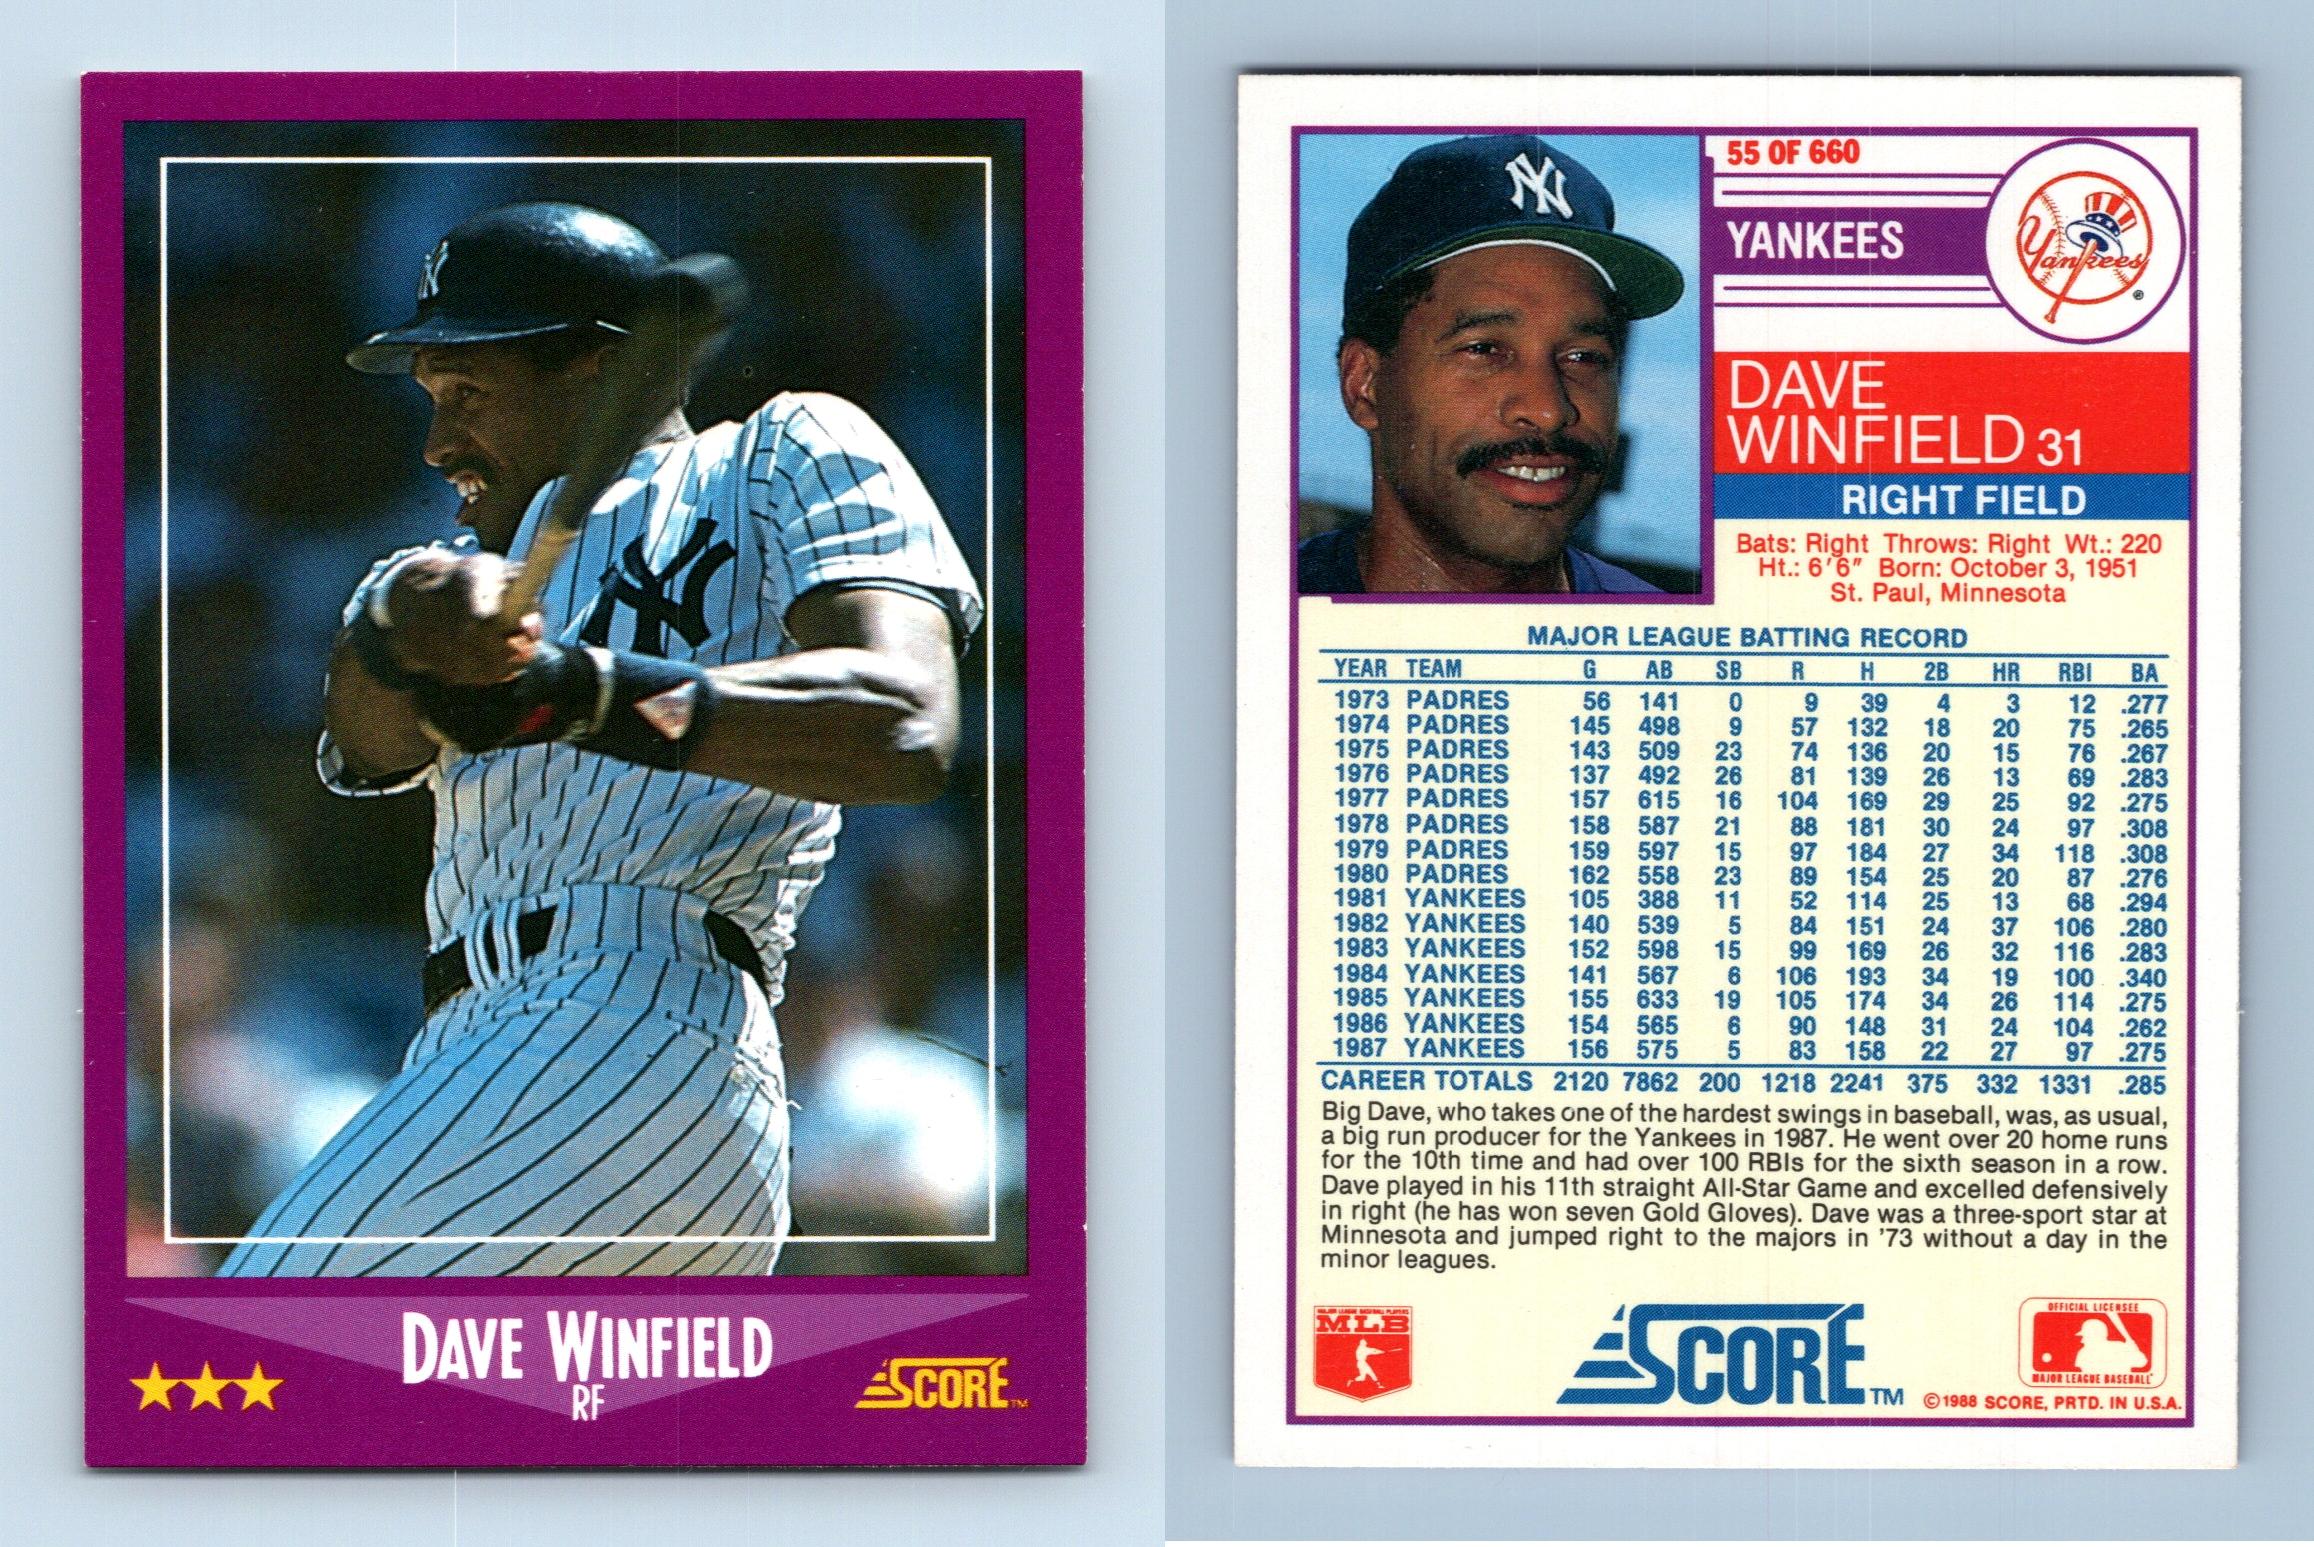 Score 1988 Major League Baseball Player Cards and Trivia Cards